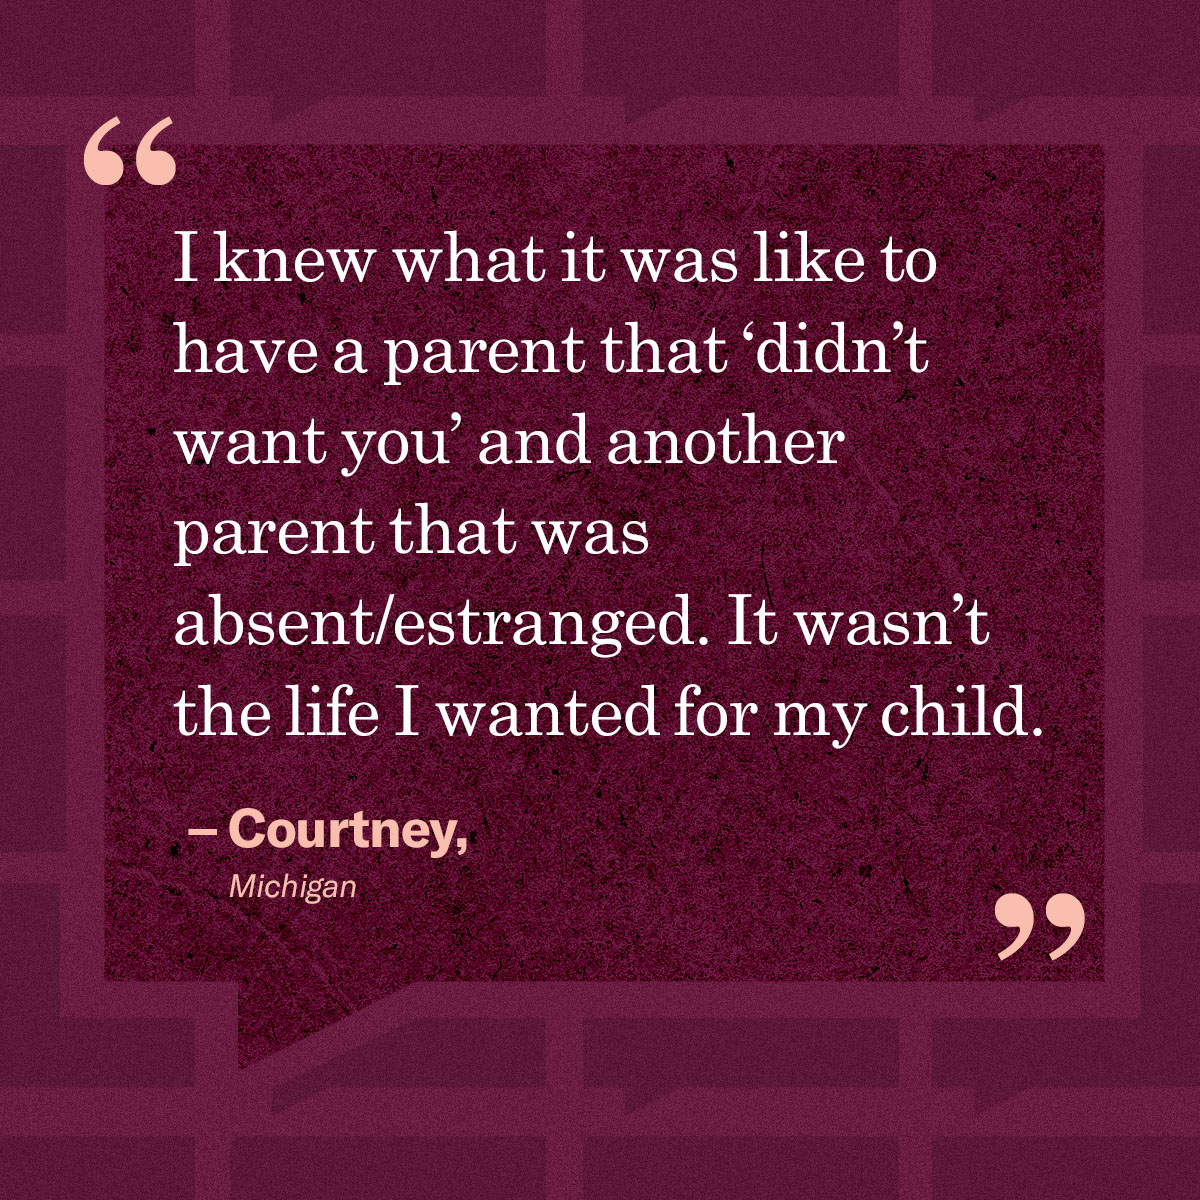 “I knew what it was like to have a parent that ‘didn’t want you’ and another parent that was absent/estranged. It wasn’t the life I wanted for my child.” – Courtney, Michigan